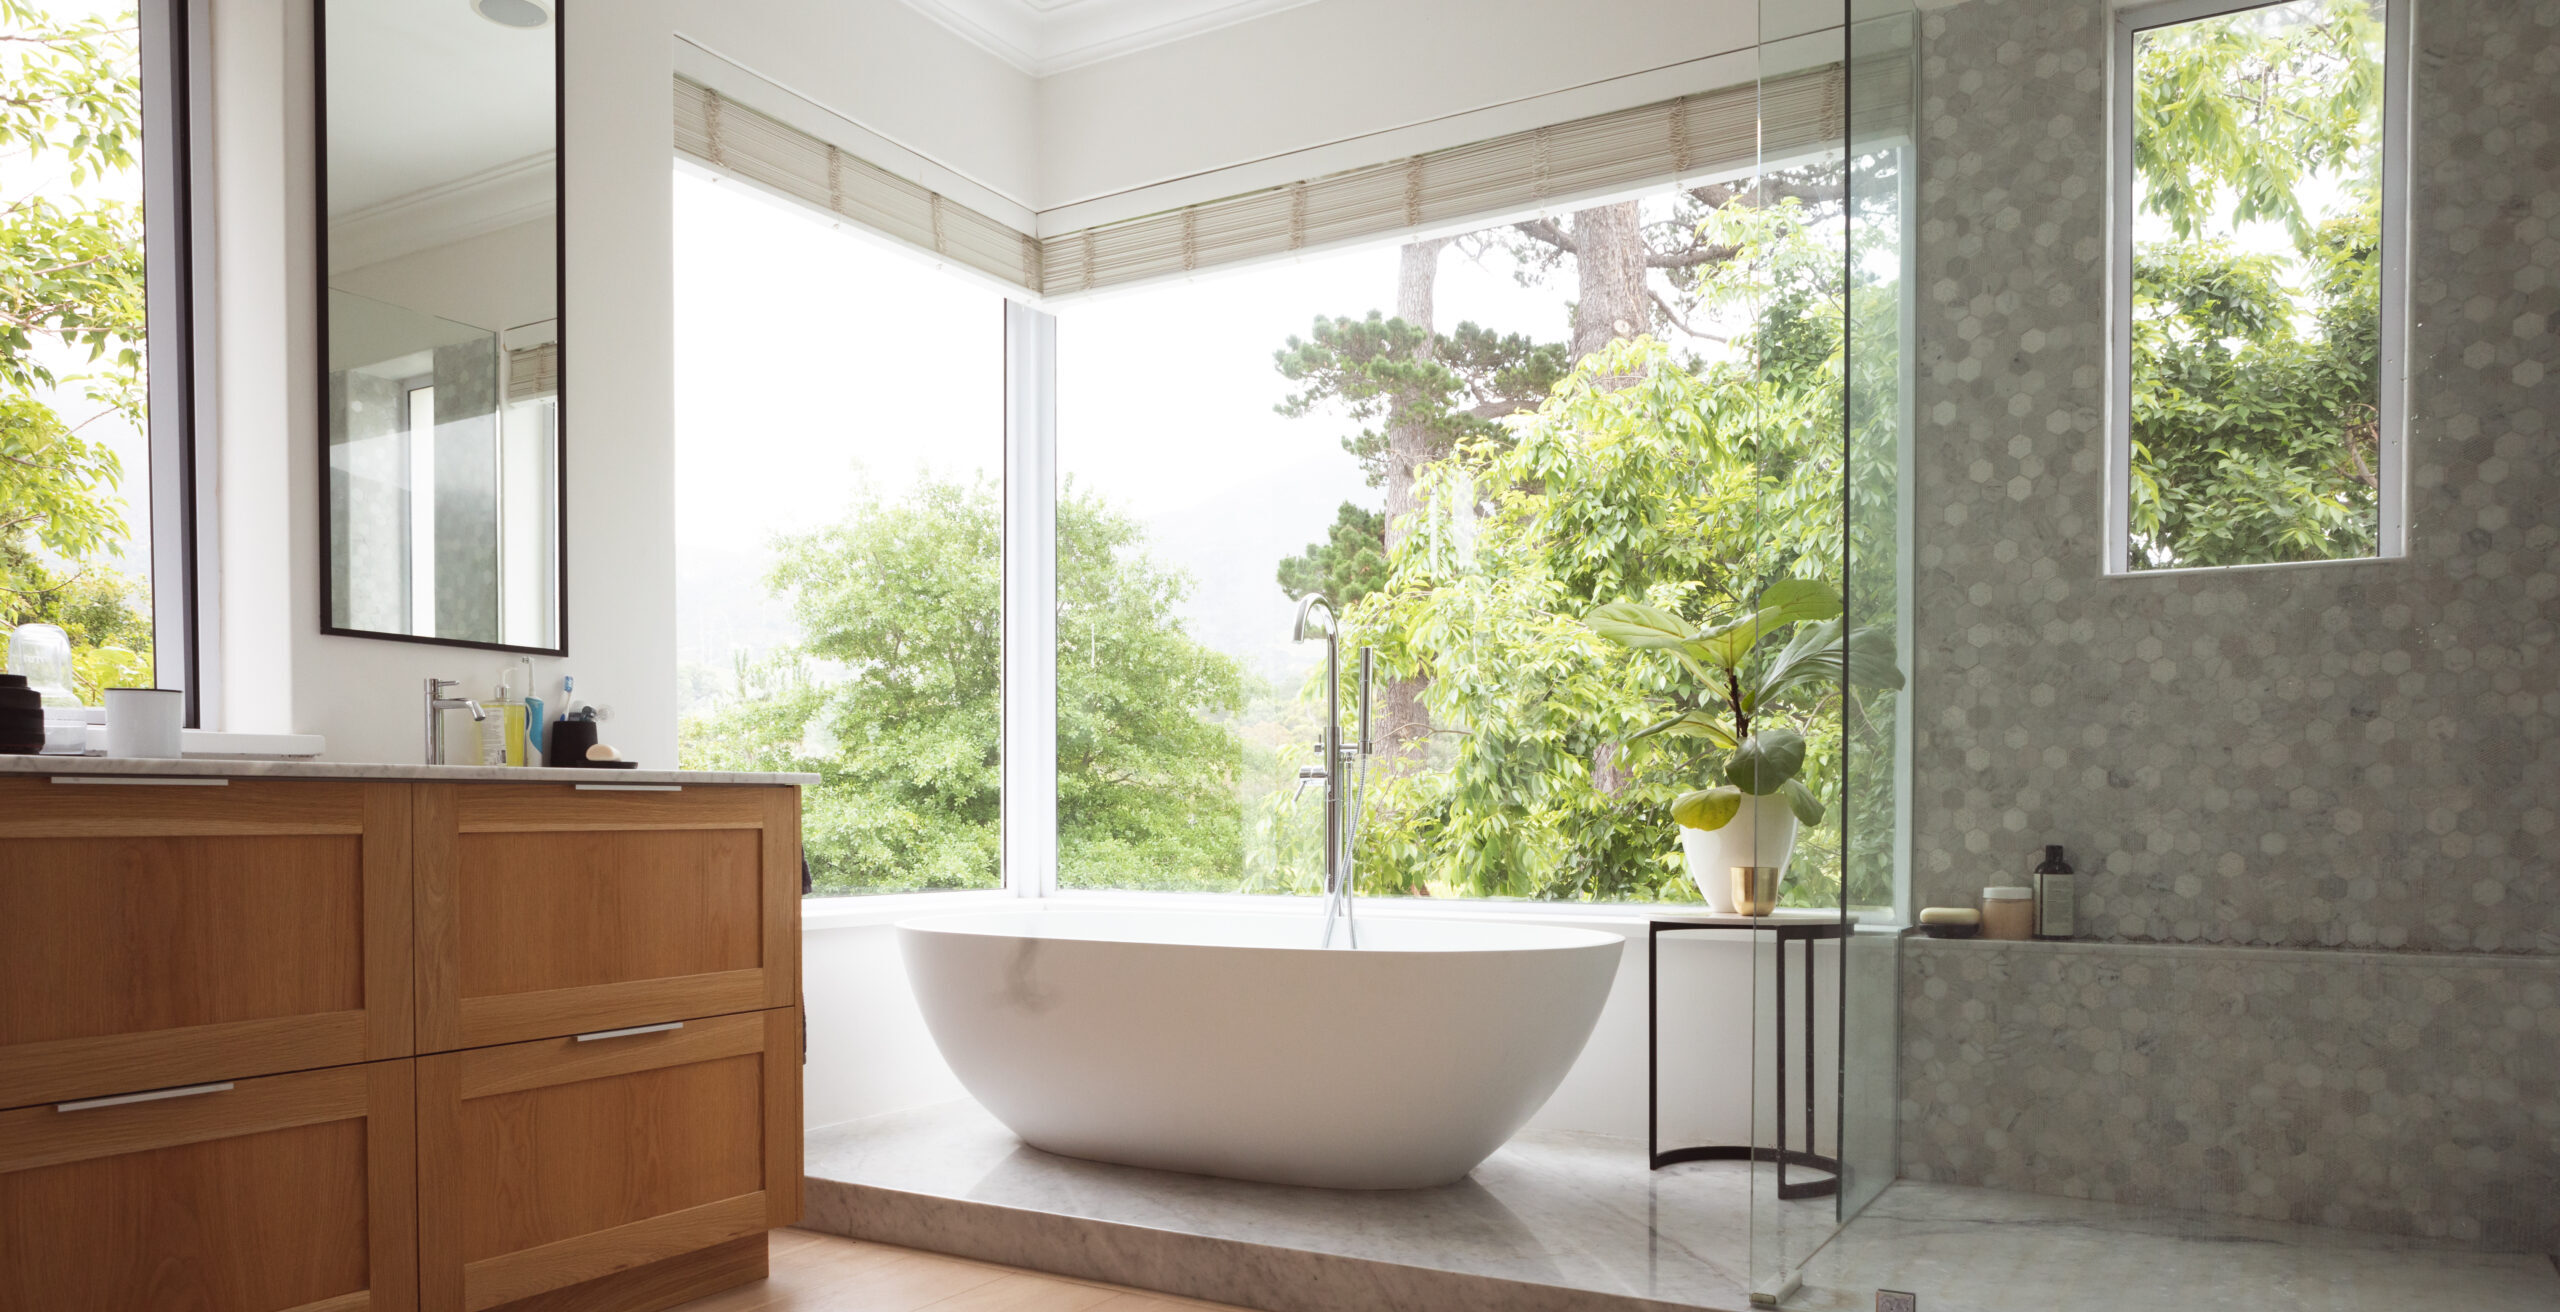 Modern Bathroom Interior Showing Free Standing Bath With Large Windows Showing Green Trees And Plants Outside, With White Bathtub And Silver Water Tap, Grey Shower And A Table With A Plant.